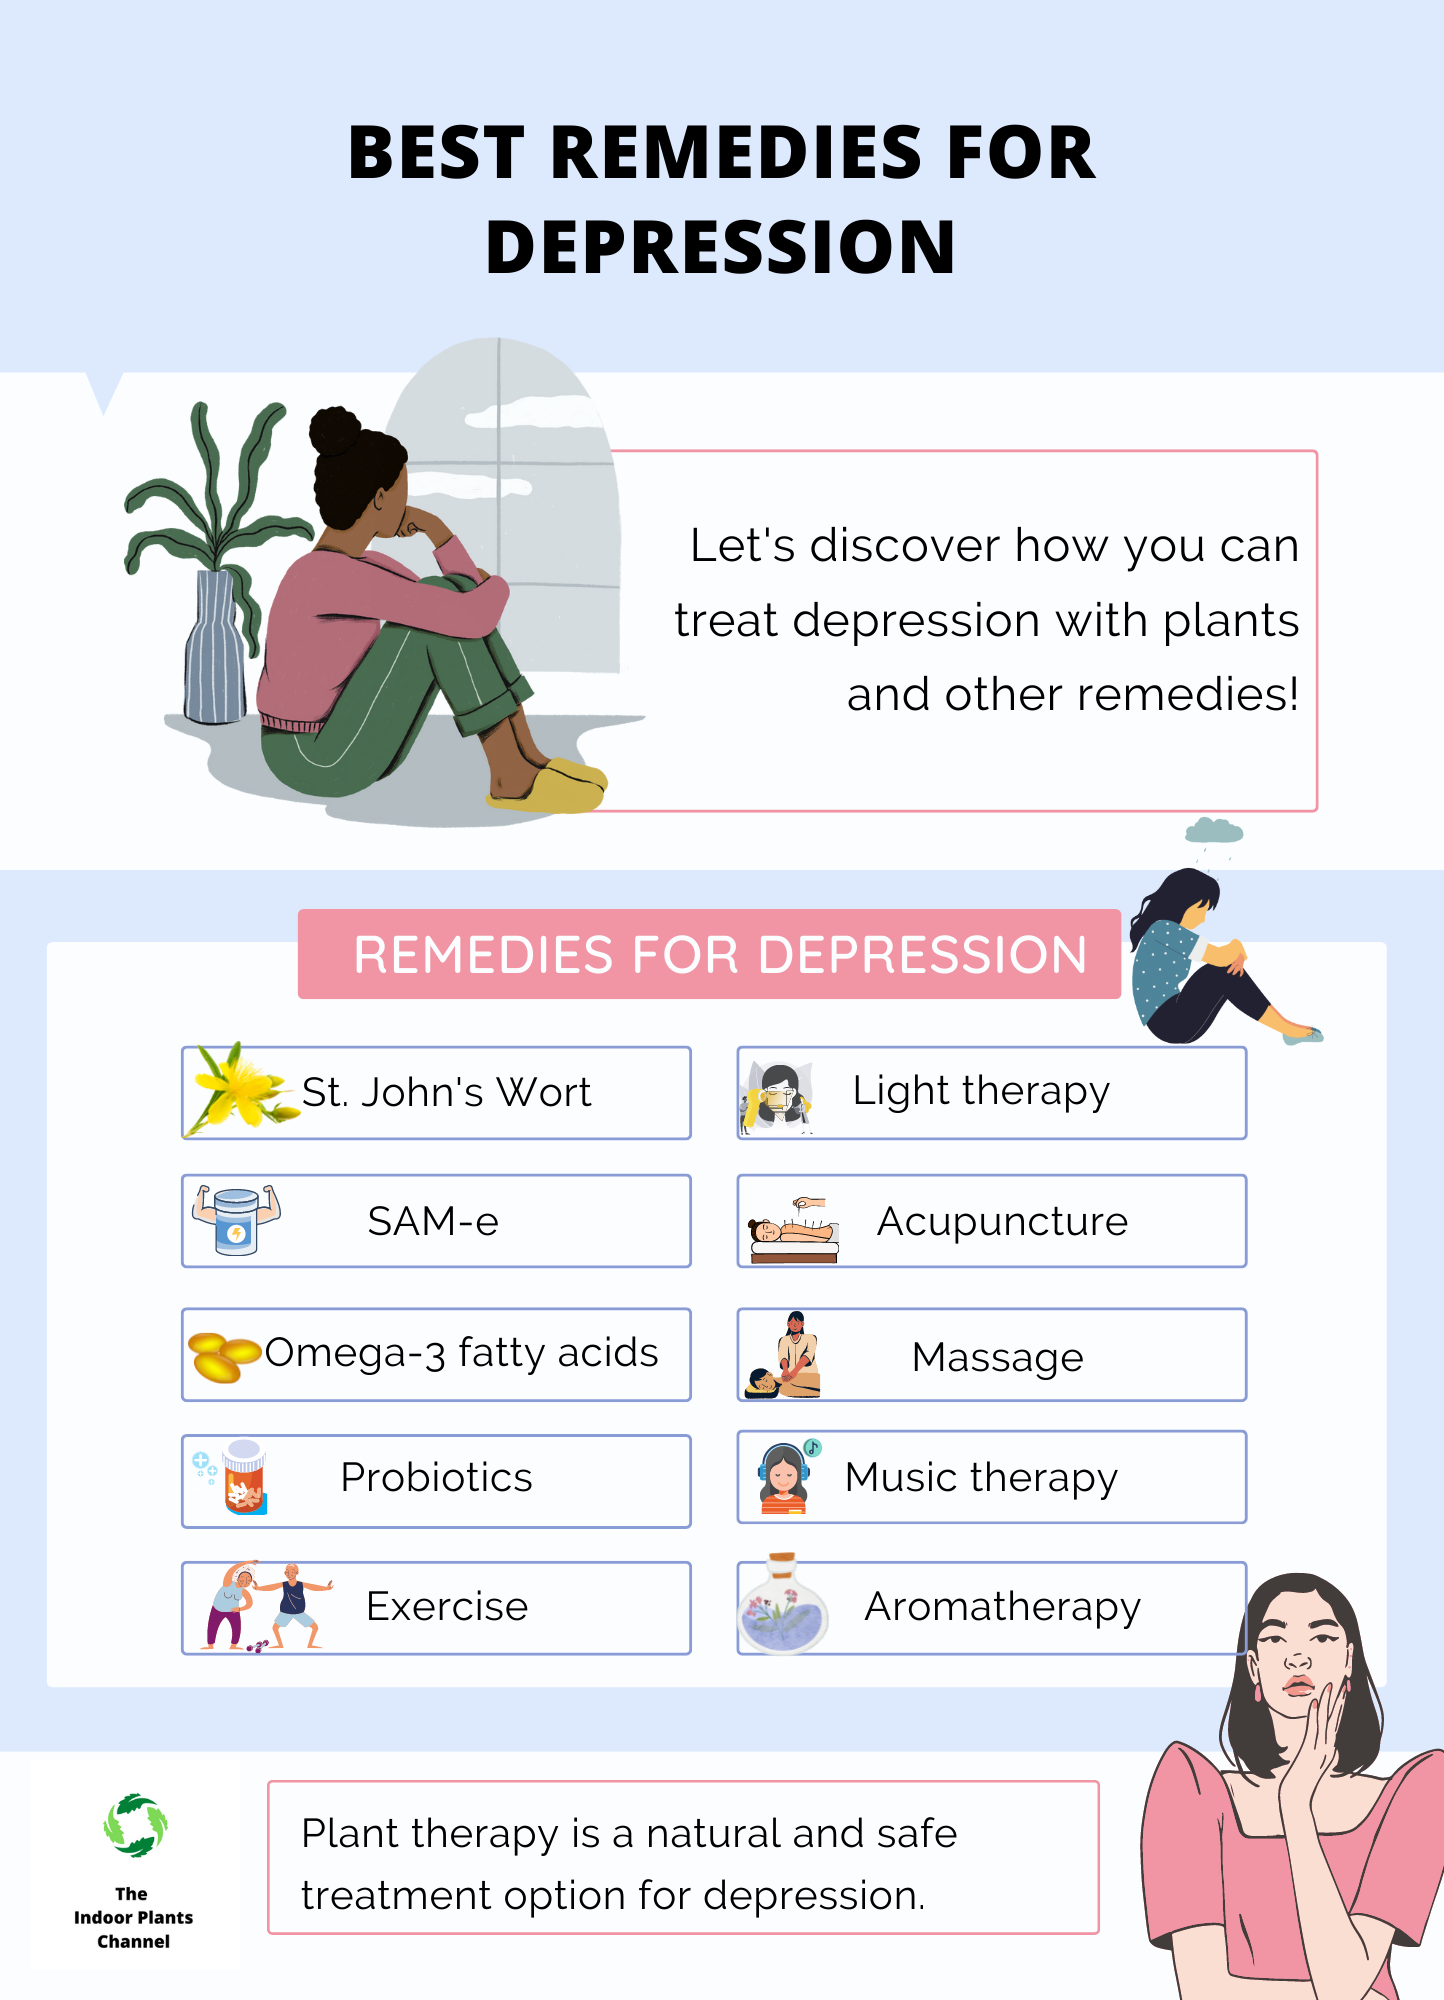 Best remedies for depression